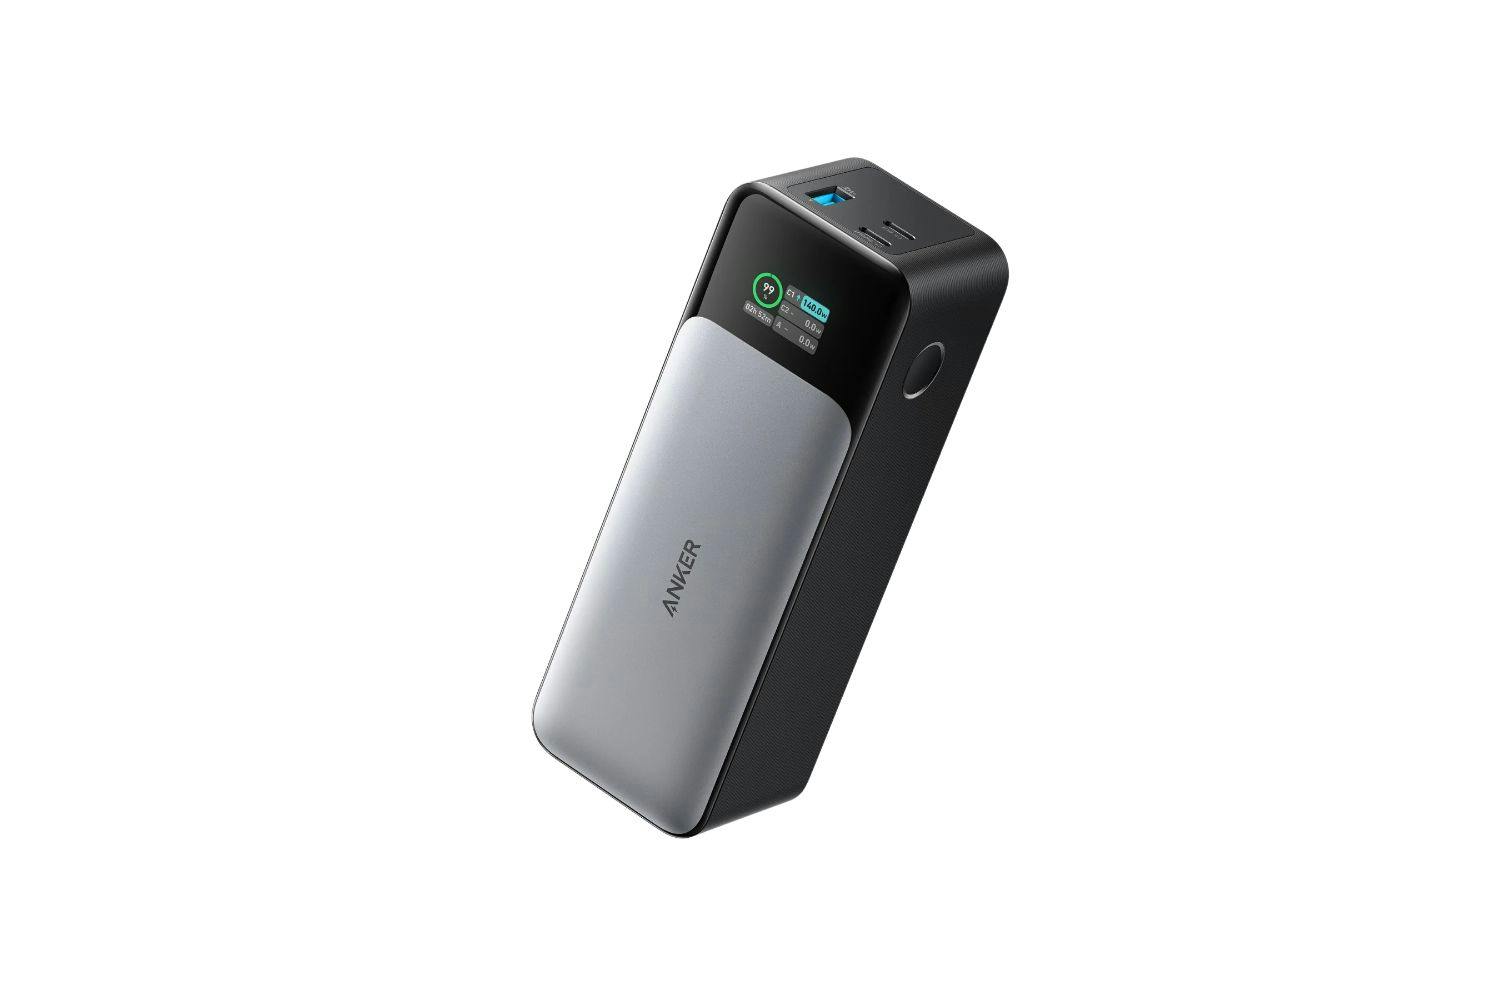 https://hniesfp.imgix.net/8/images/detailed/375/Power_Bank_Anker_A1289011.jpg?fit=fill&bg=0FFF&w=1500&h=1000&auto=format,compress